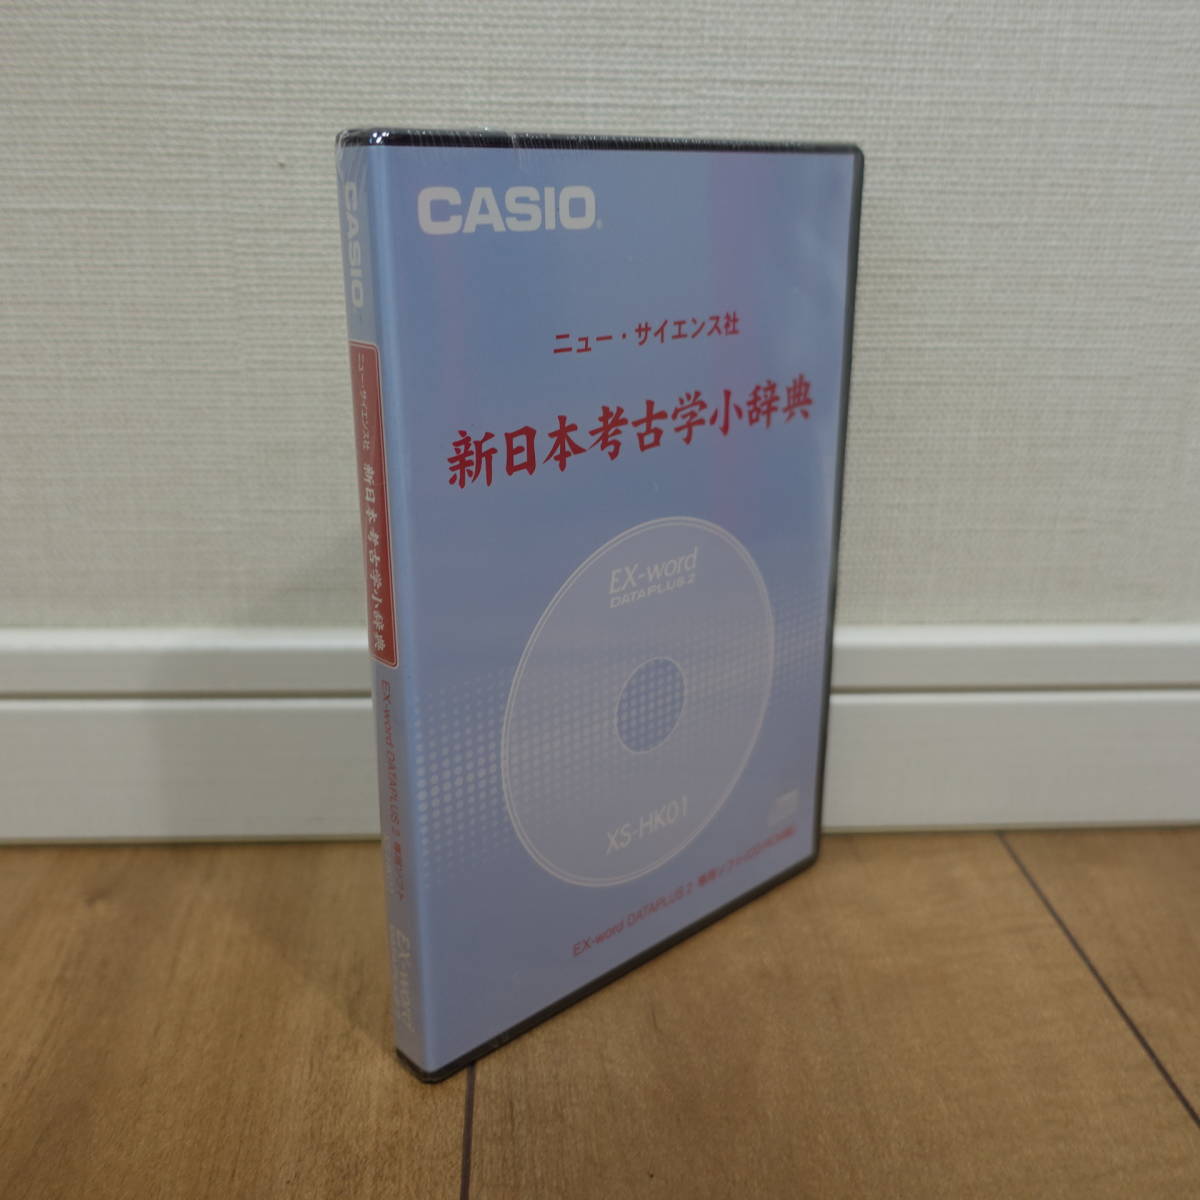 CASIO Ex-word DATAPLUS 2 exclusive use soft XS-KH01 new * science company New Japan archaeology small dictionary unopened 